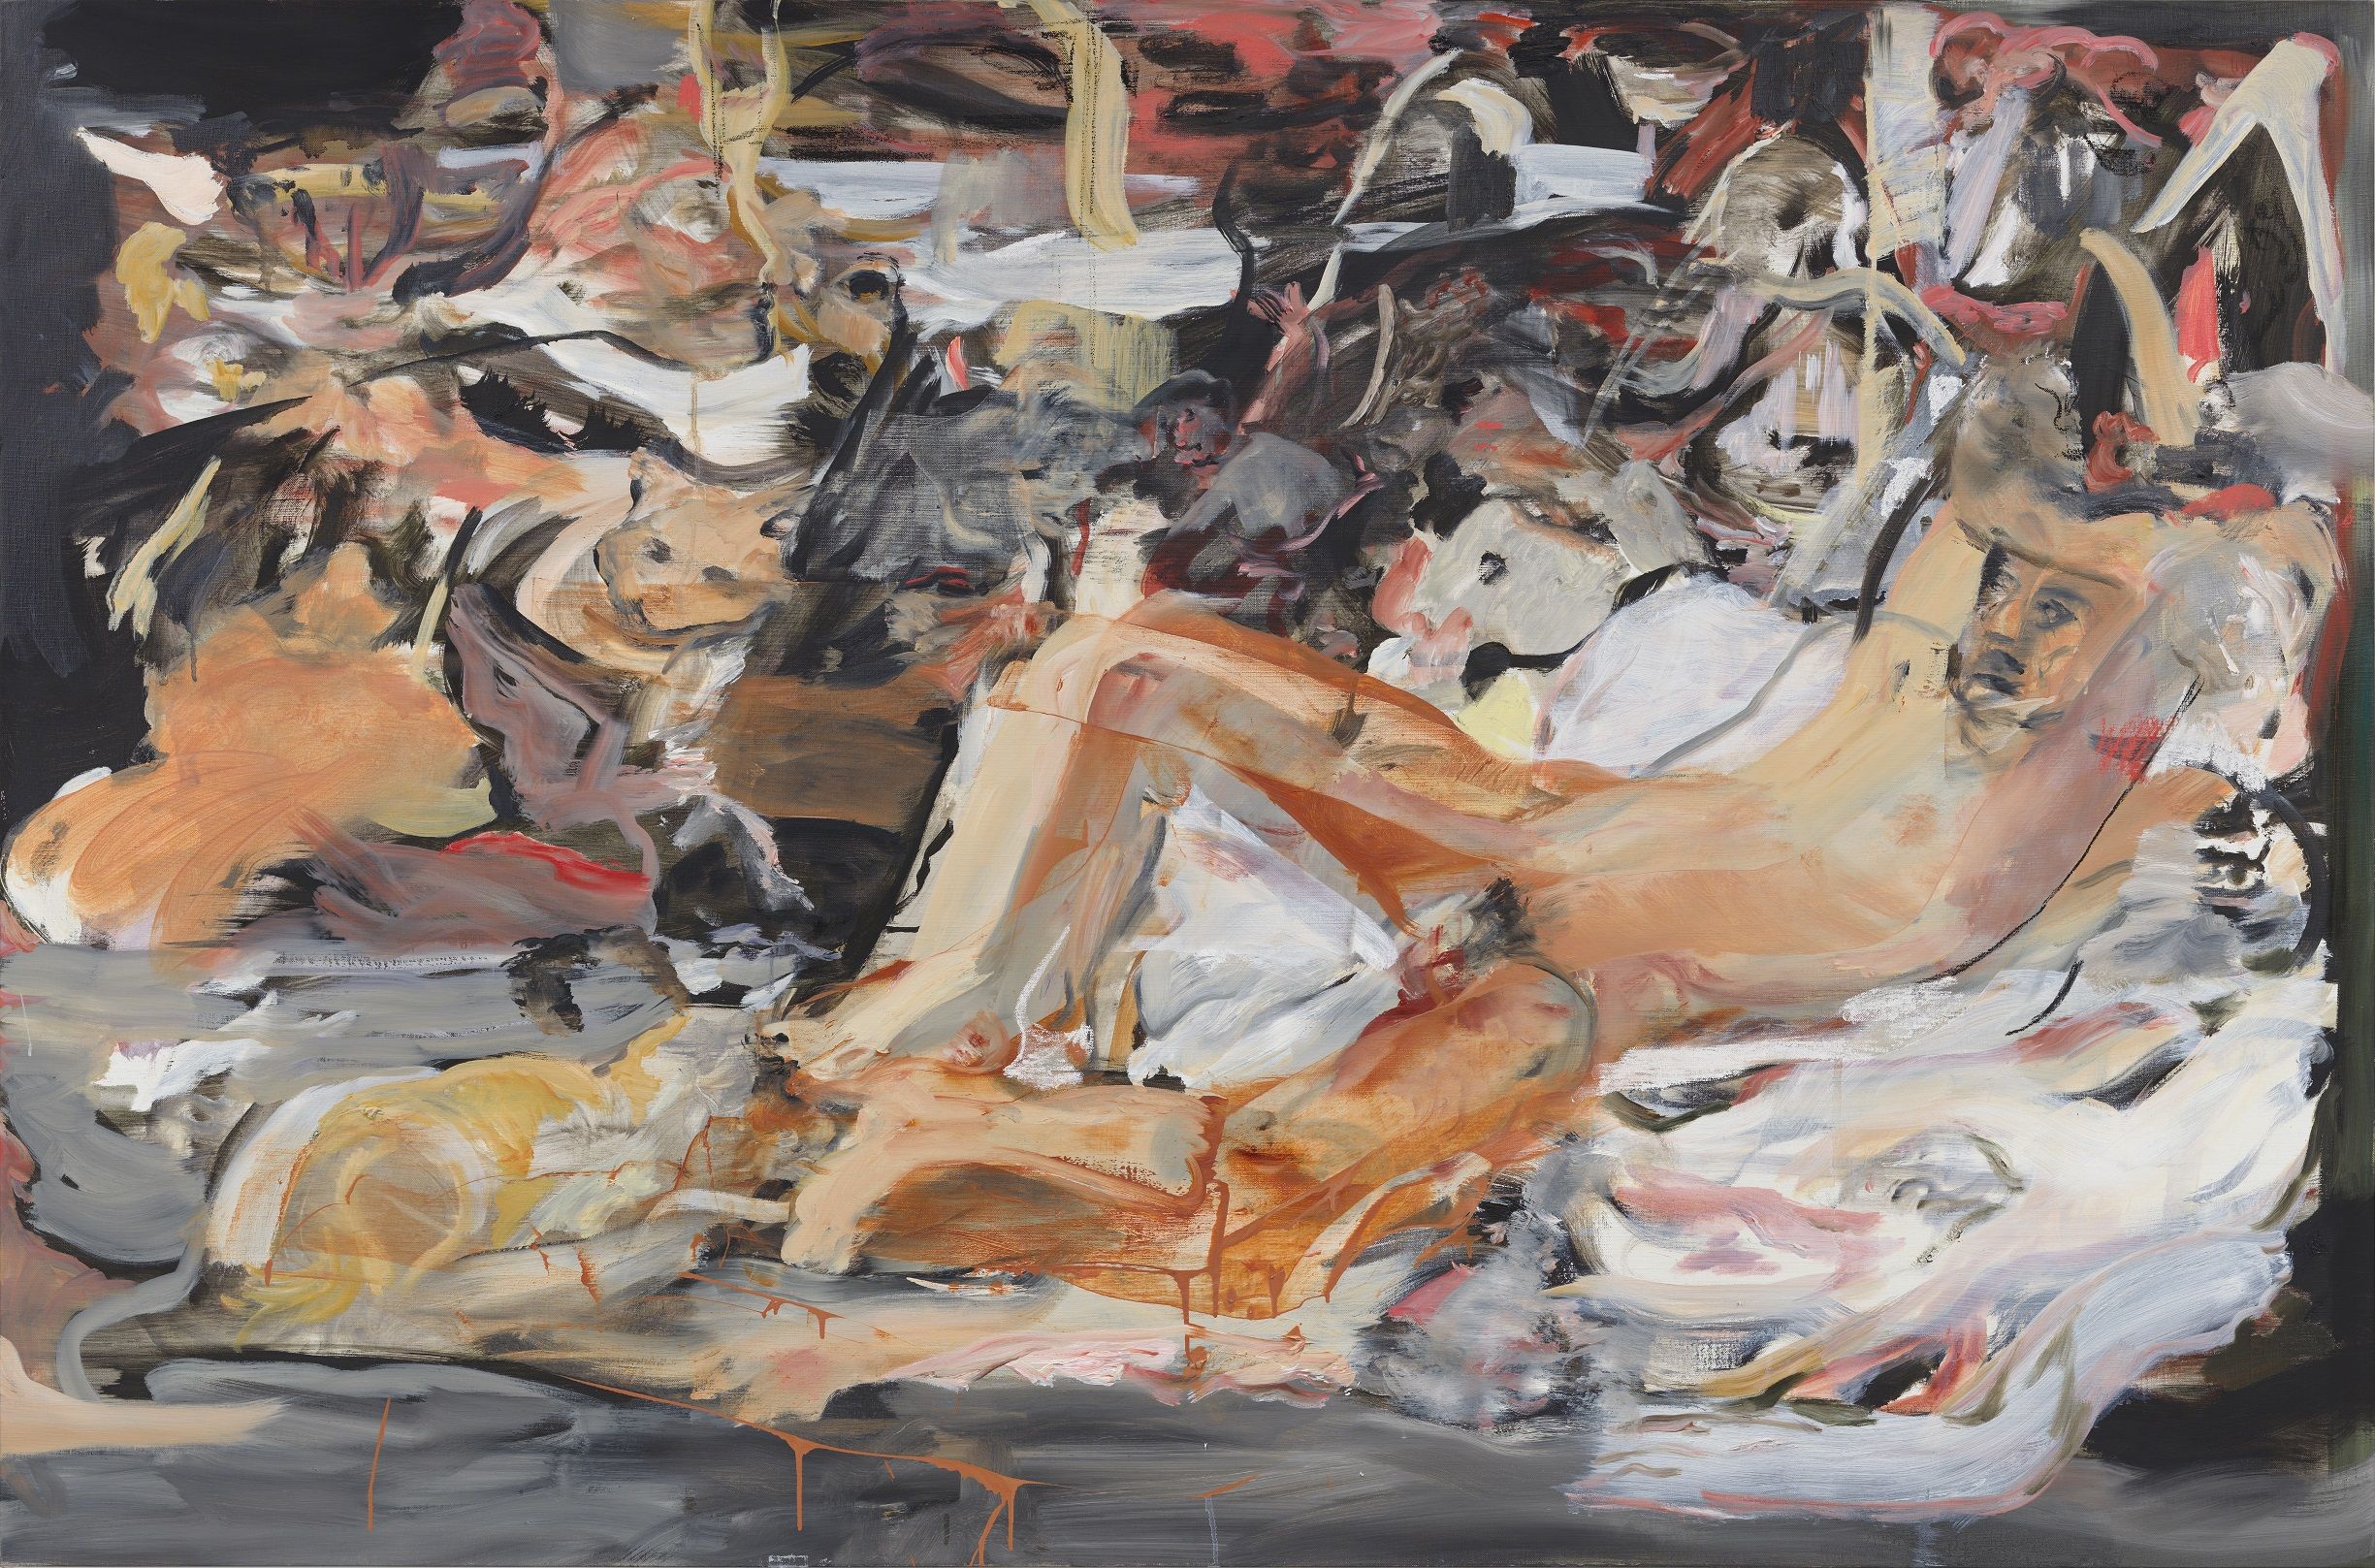 Cecily Brown, born 1969 Boy with a Cat 2015 Oil, pastel on linen 1092 x 1651 mm Collection of Danny and Lisa Goldberg © Cecily Brown Photo: Richard Ivey